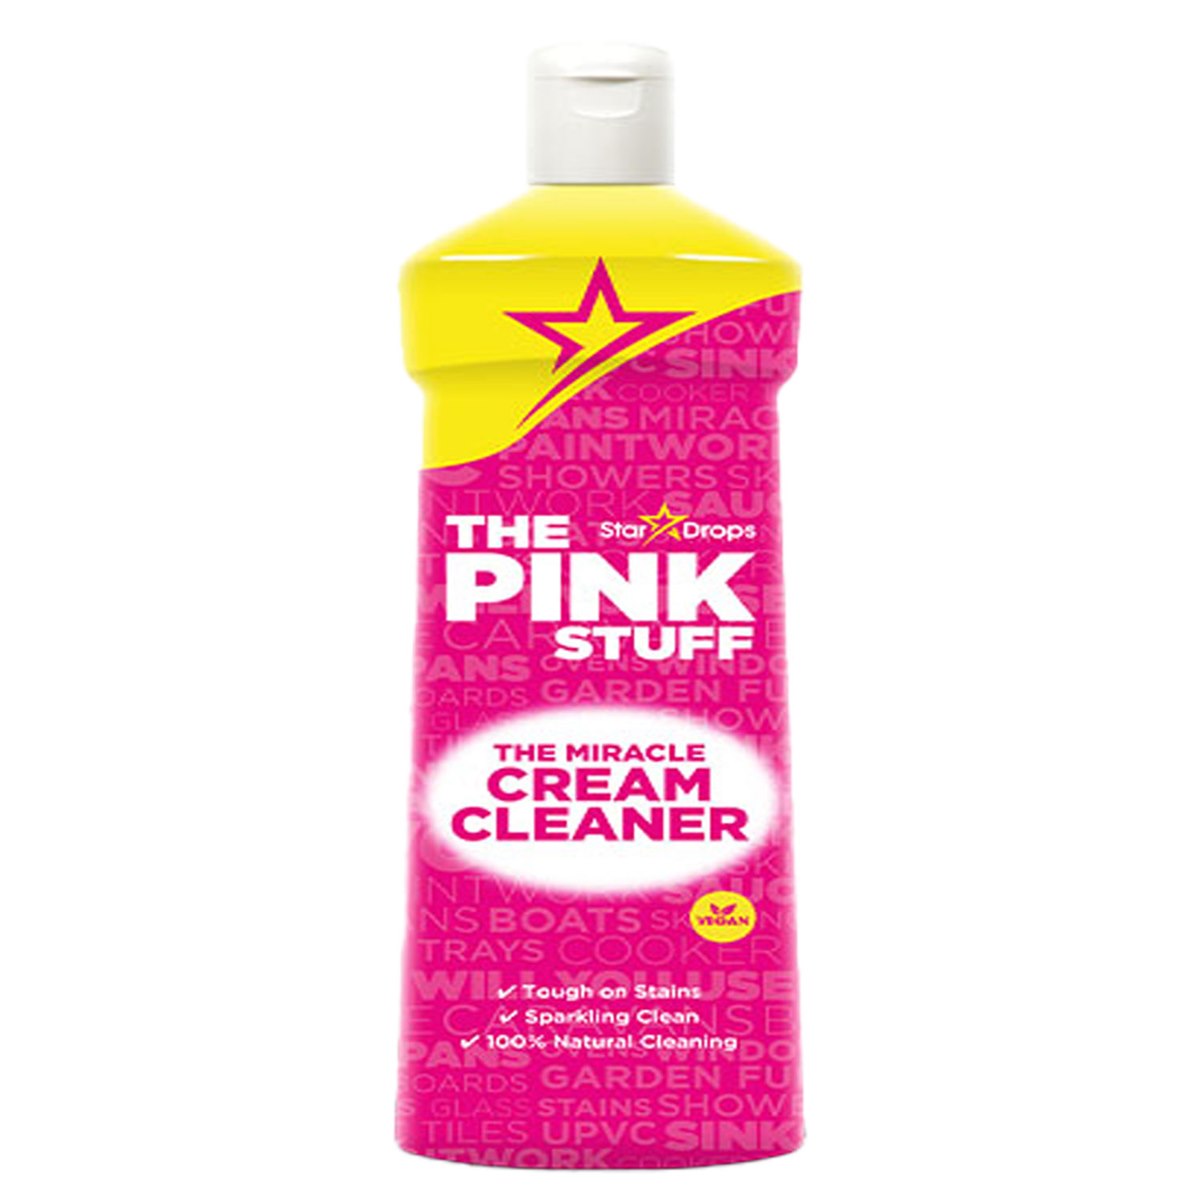 The Pink Stuff The Miracle Cream Cleaner